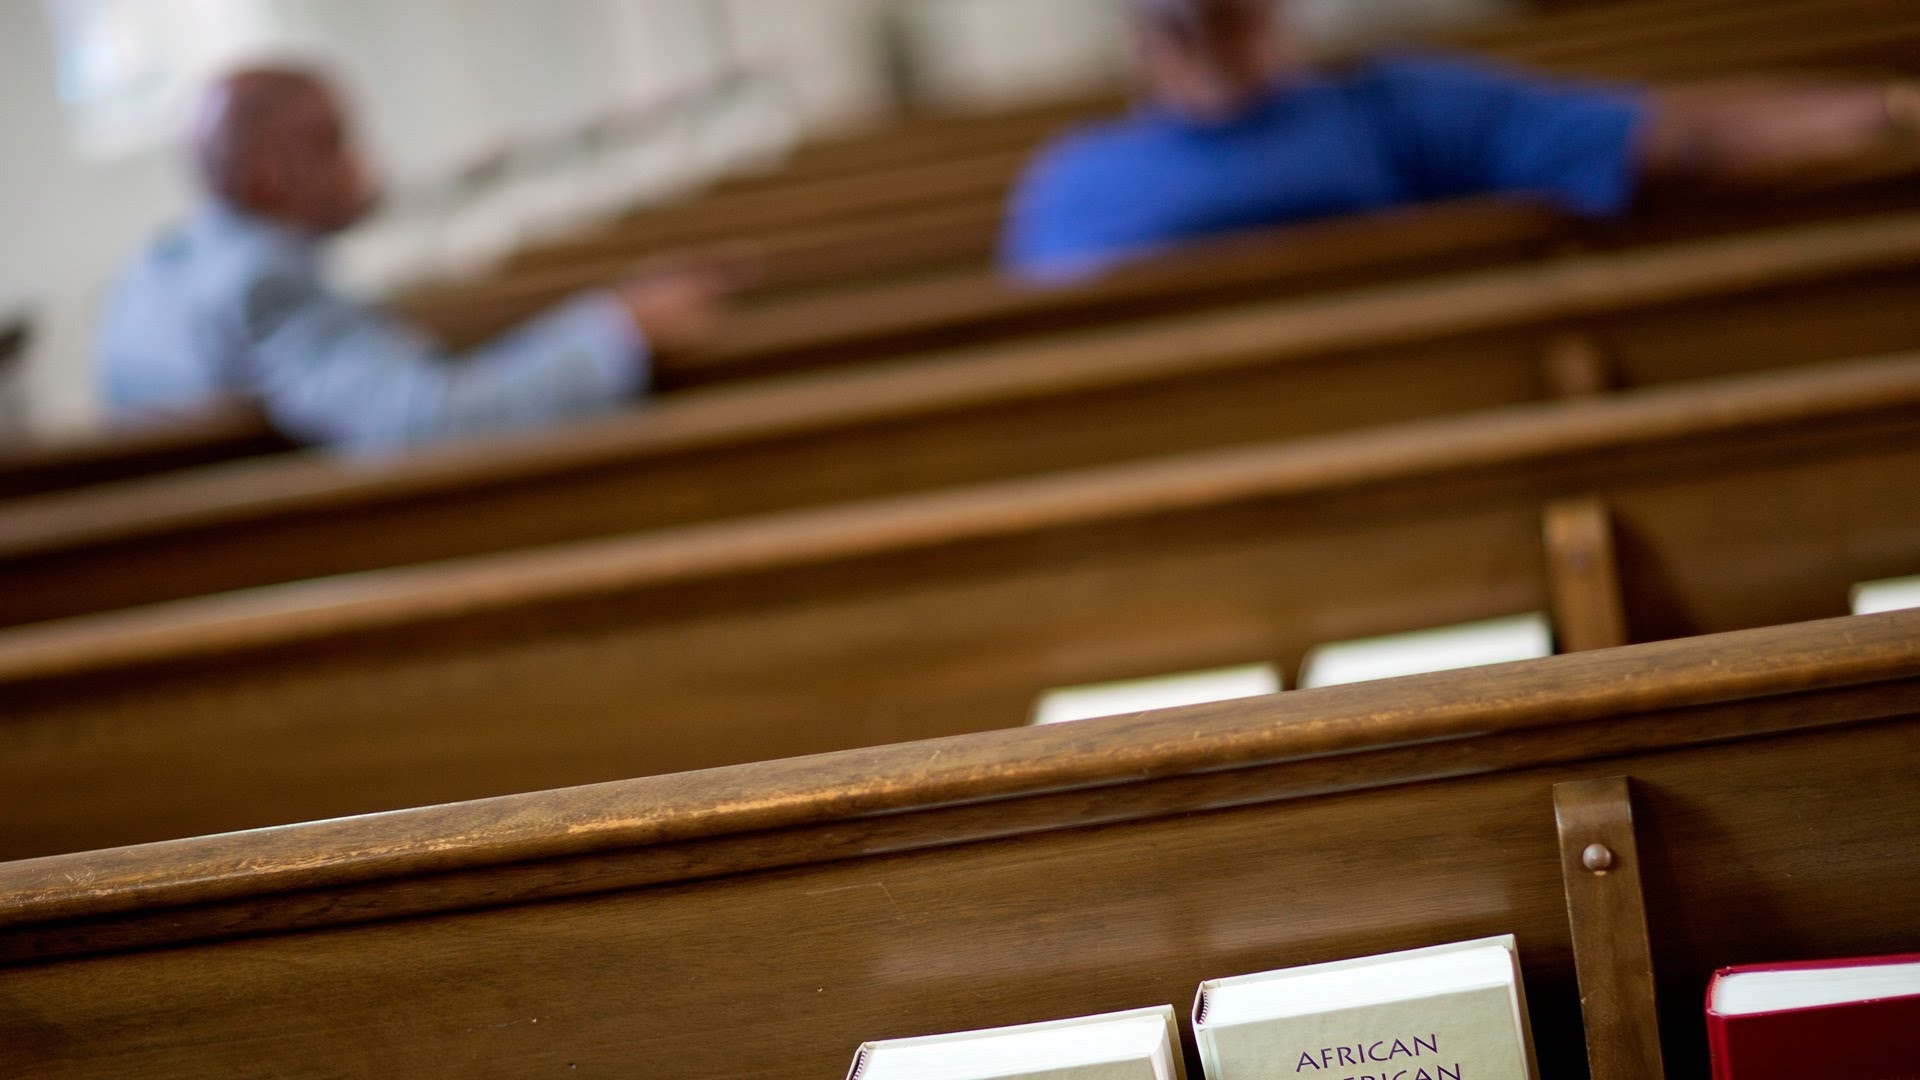 For Pastors Trying To Break 100, or 200 Attendance Levels: What Do You Do?